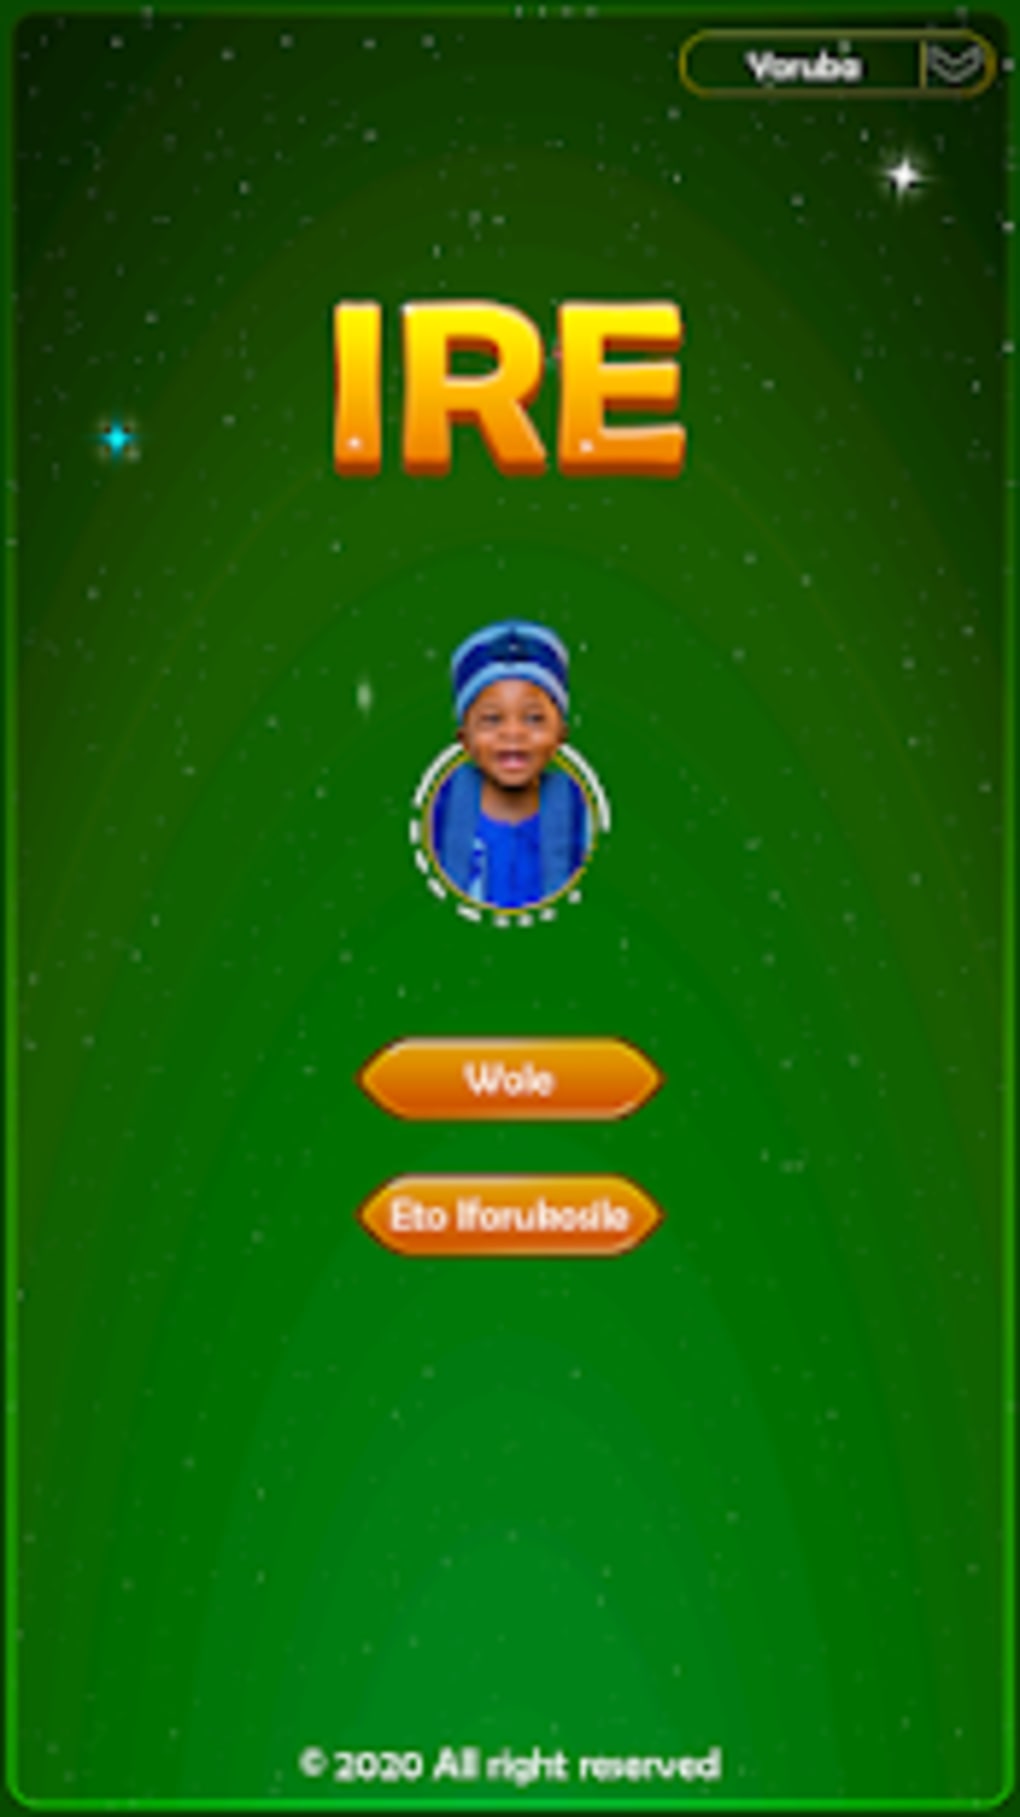 IRE Game for Android - Download Android